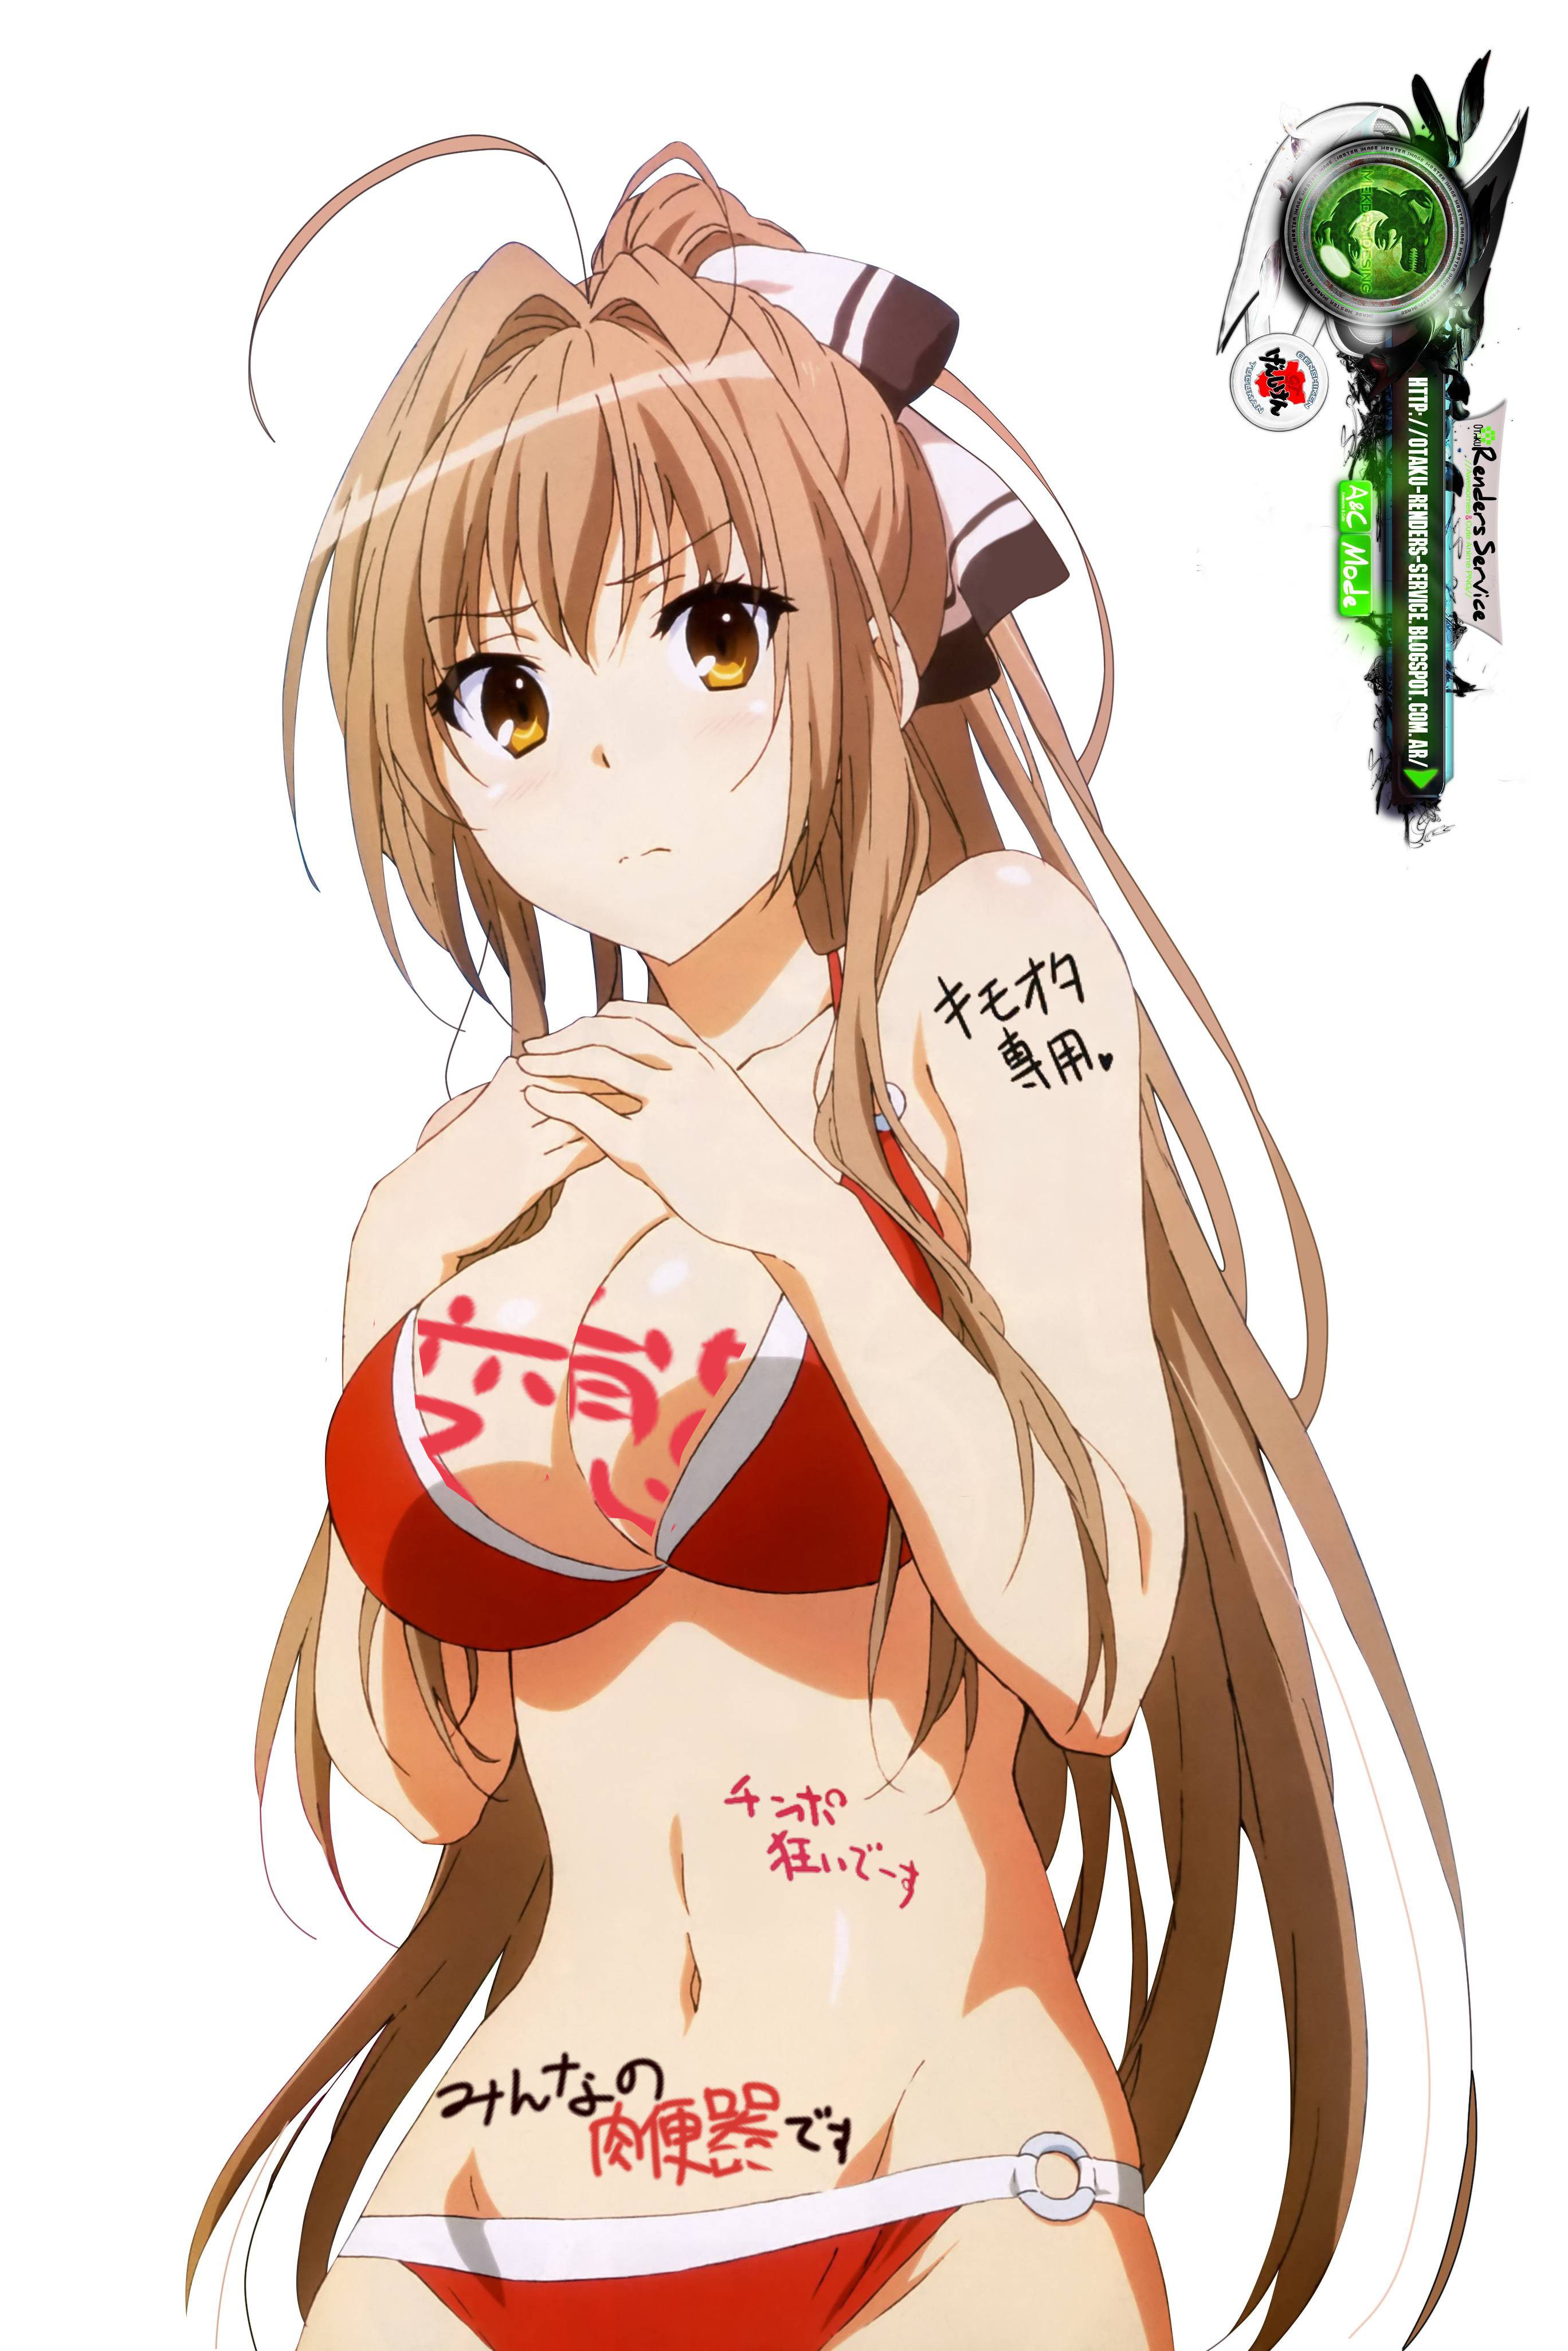 【Secondary】Meat urinal image graffitied on the body is here wwwwwww 7